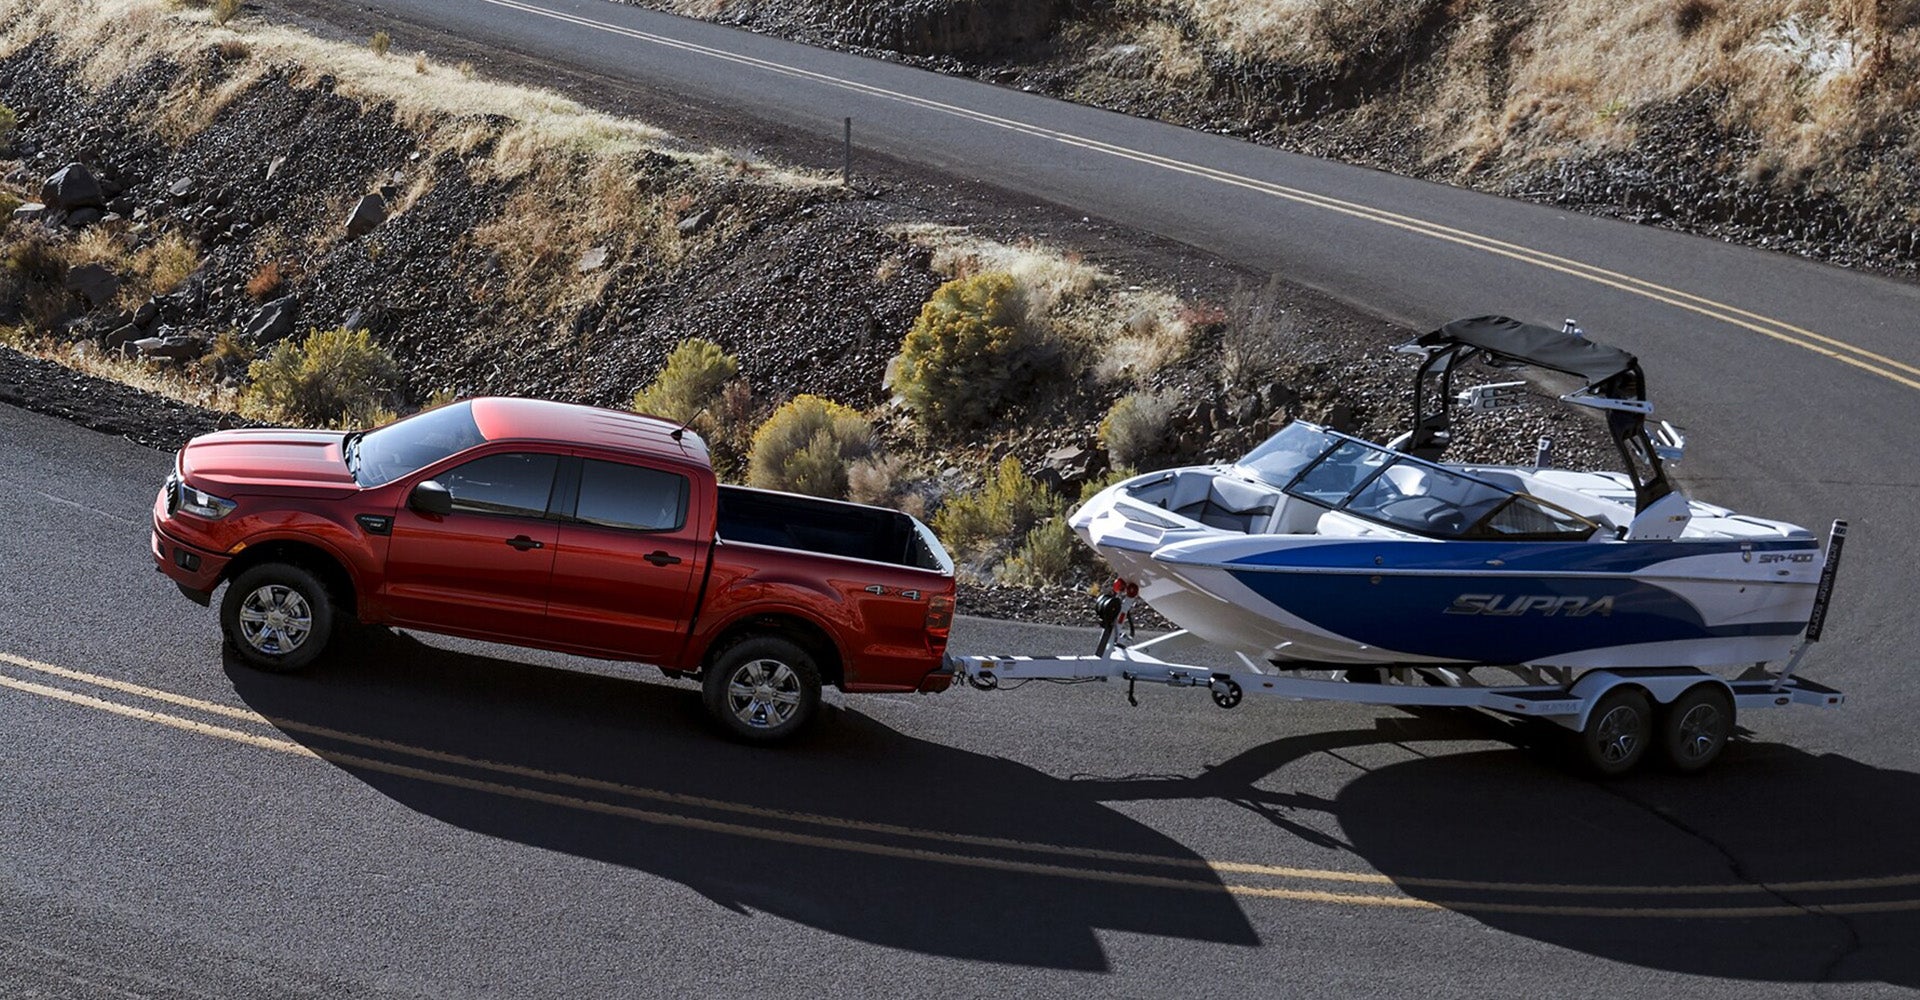 2022 Ford Ranger Towing Capacity